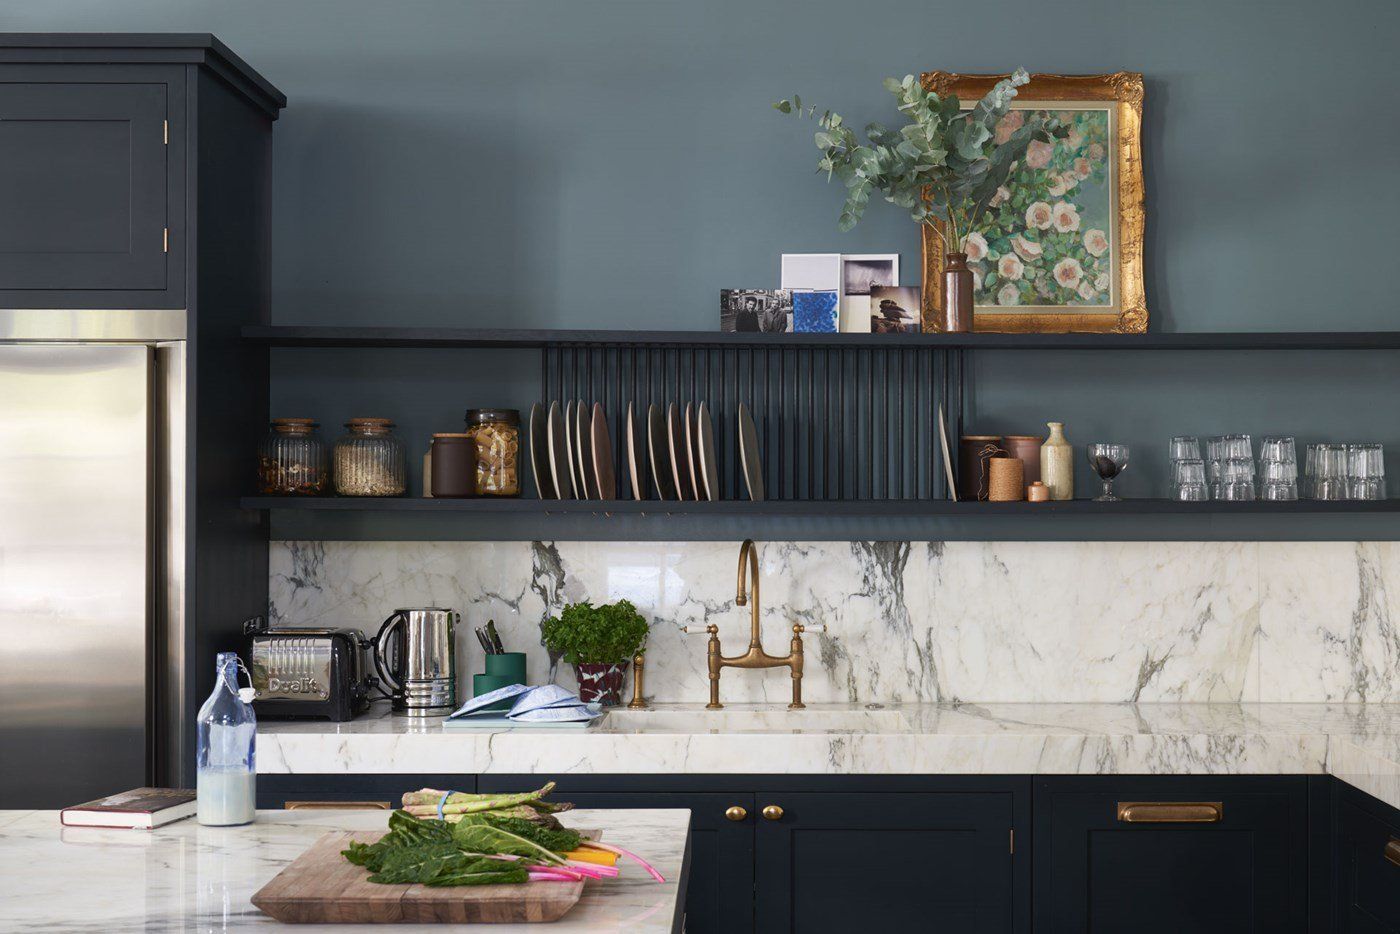 2021 Kitchen Trends What Styles Are, What Color Kitchens Are In Style 2021